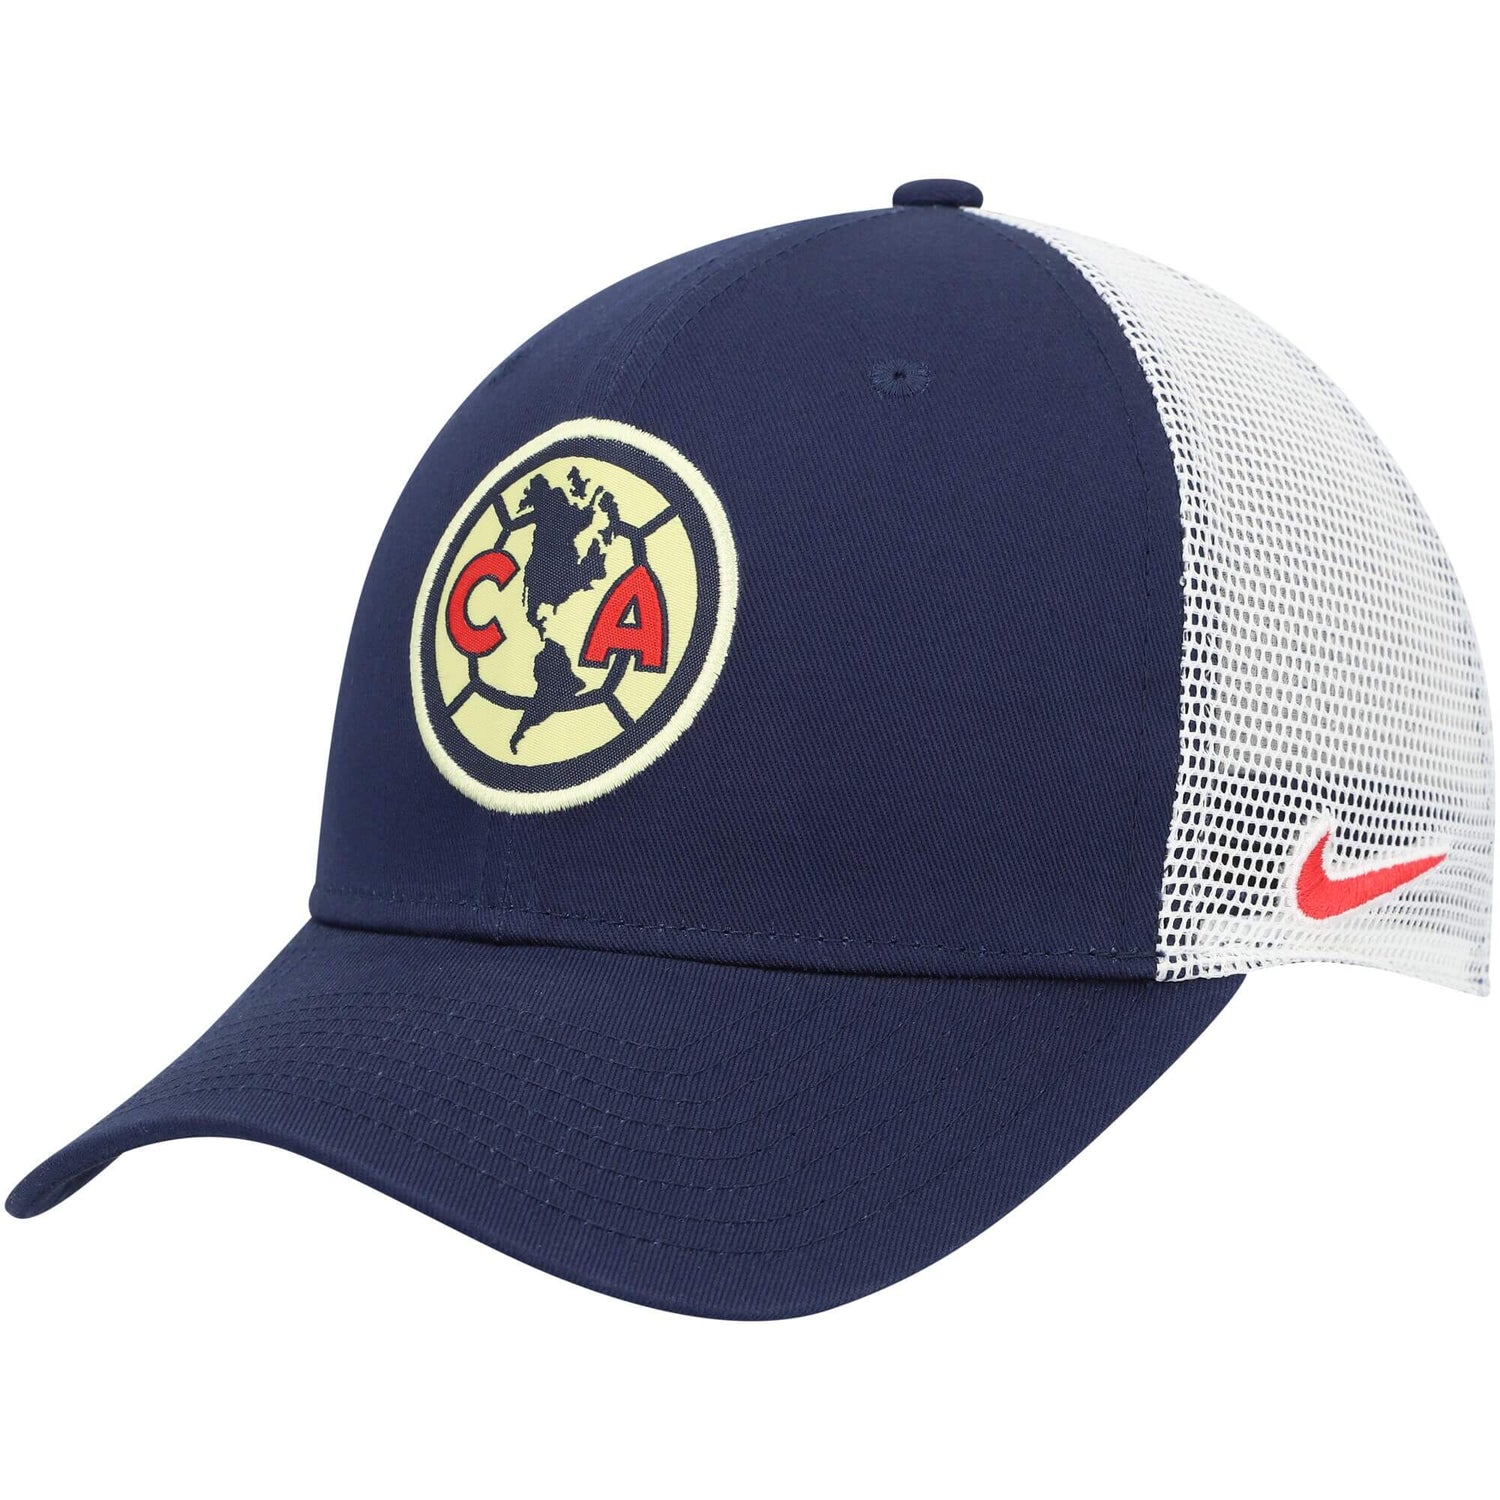 Nike Club America Classic 99 Trucker Cap - Navy-White (Front - Lateral 1)